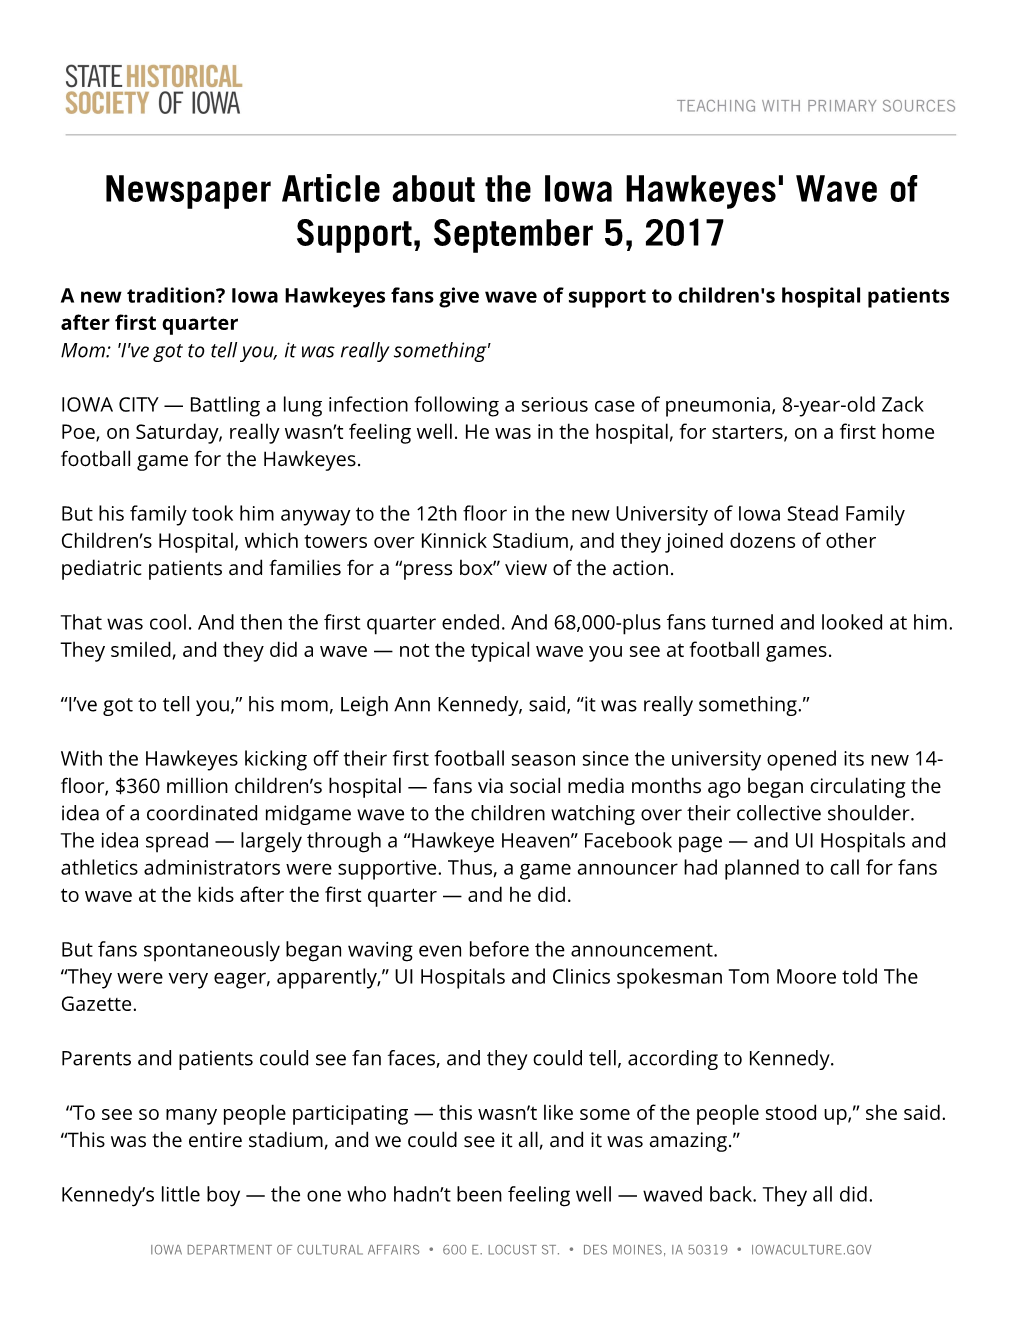 Full Transcript of Newspaper Article About the Iowa Hawkeyes' Wave Of